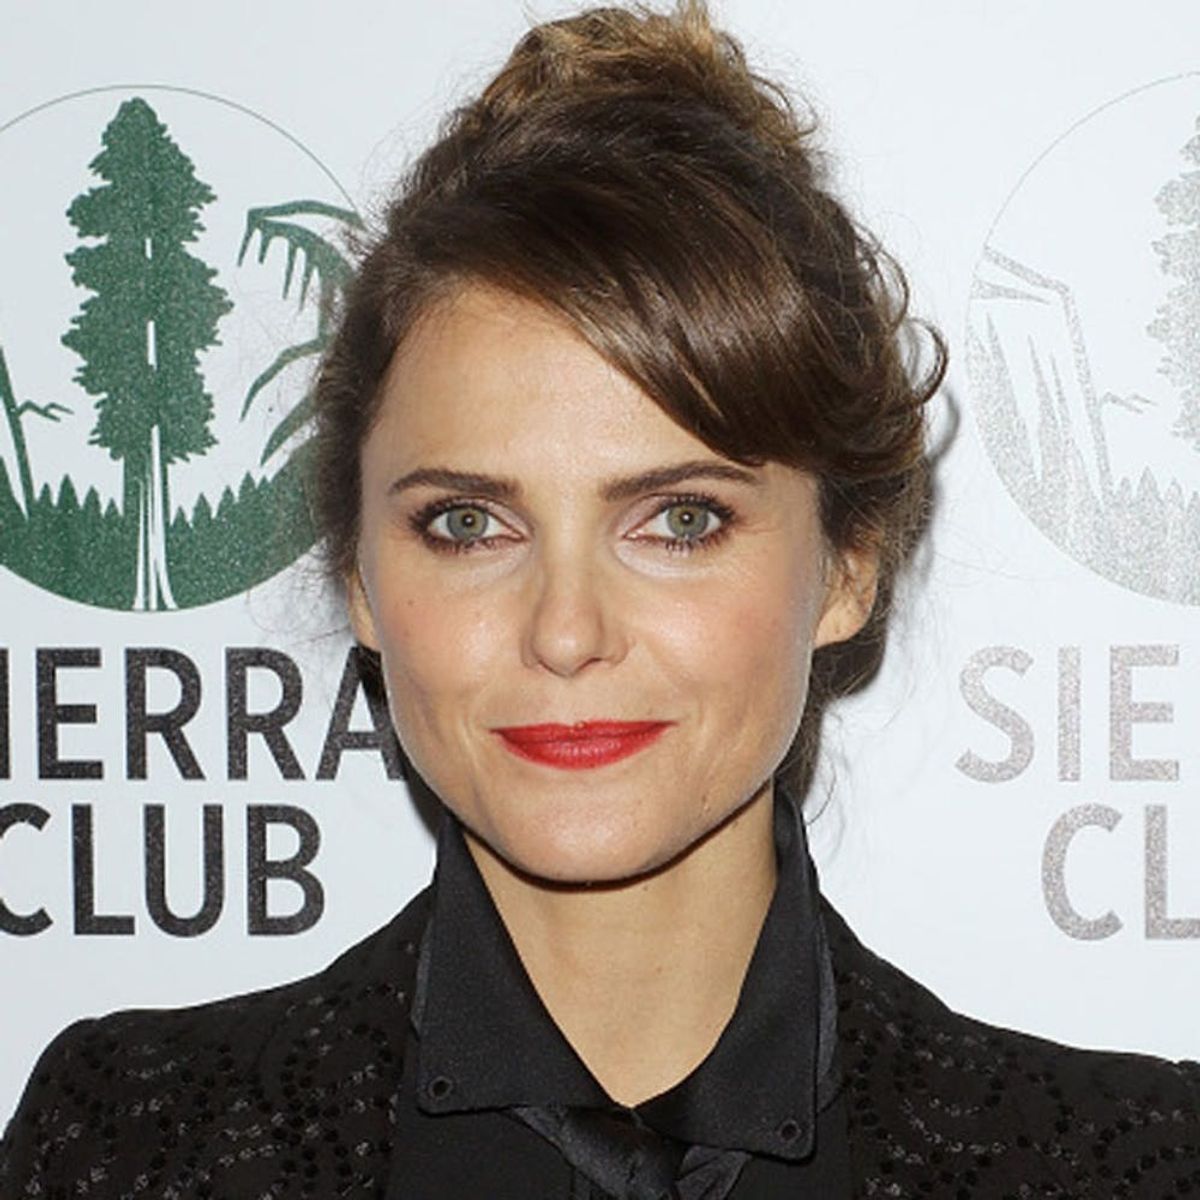 5 Tips We Can ALL Steal from Keri Russell’s Effortlessly Chic Maternity Style